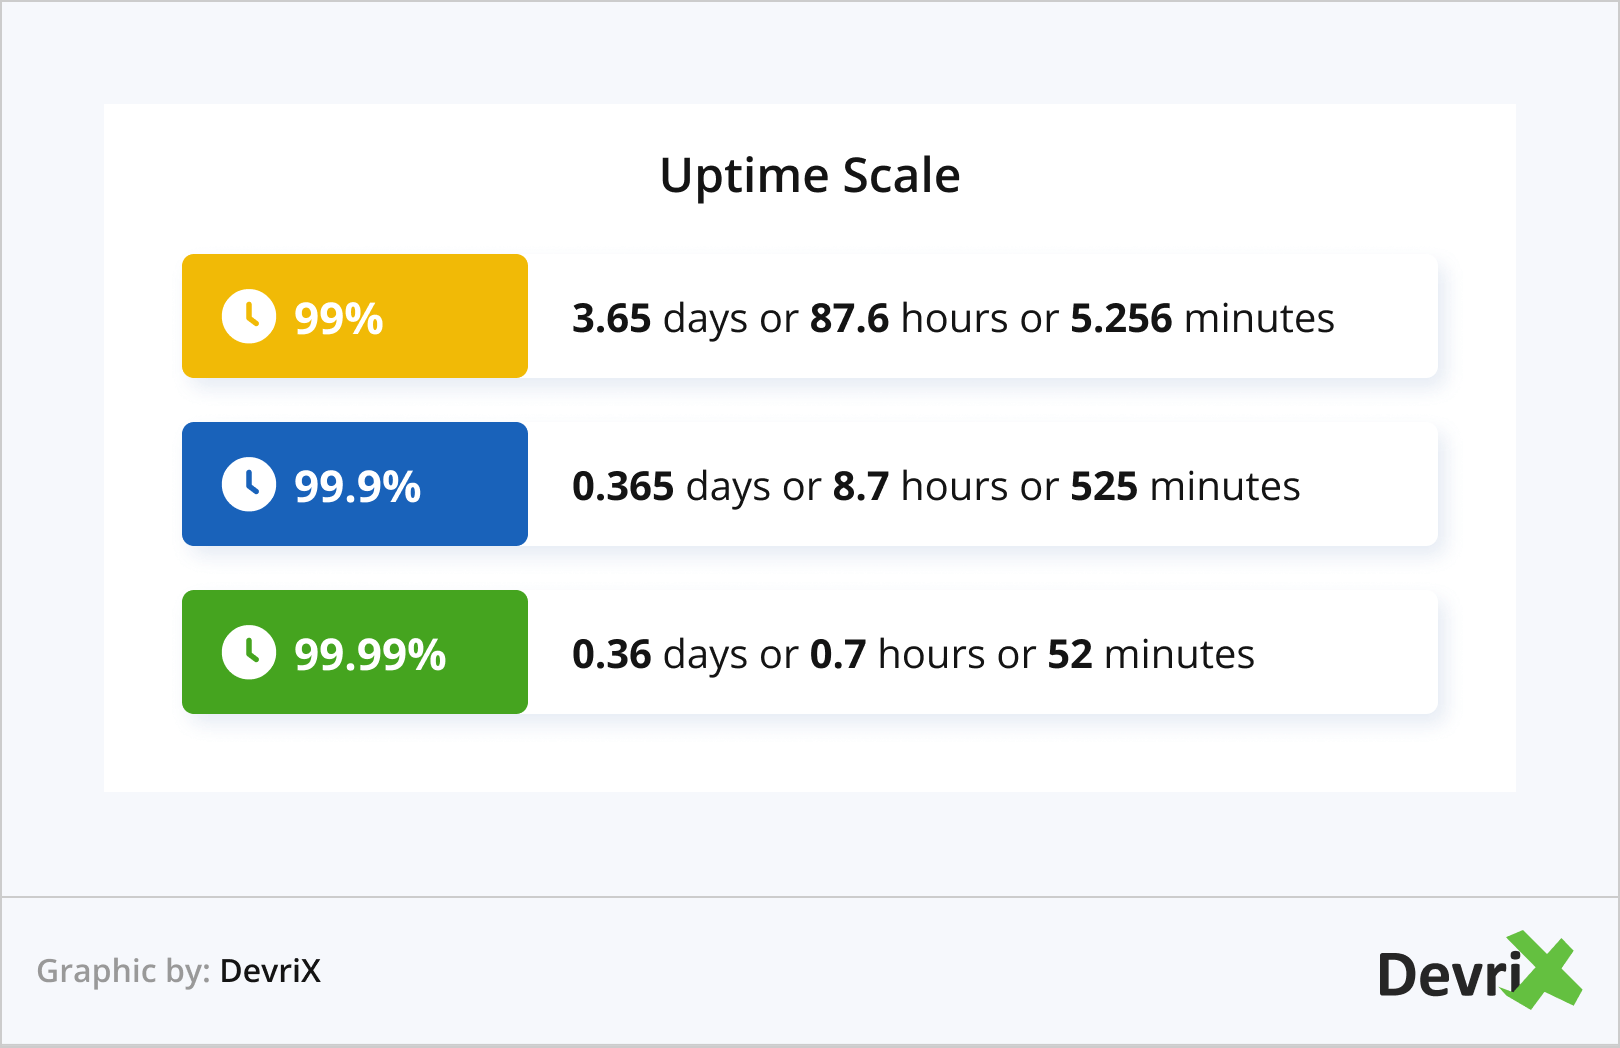 Uptime Scale